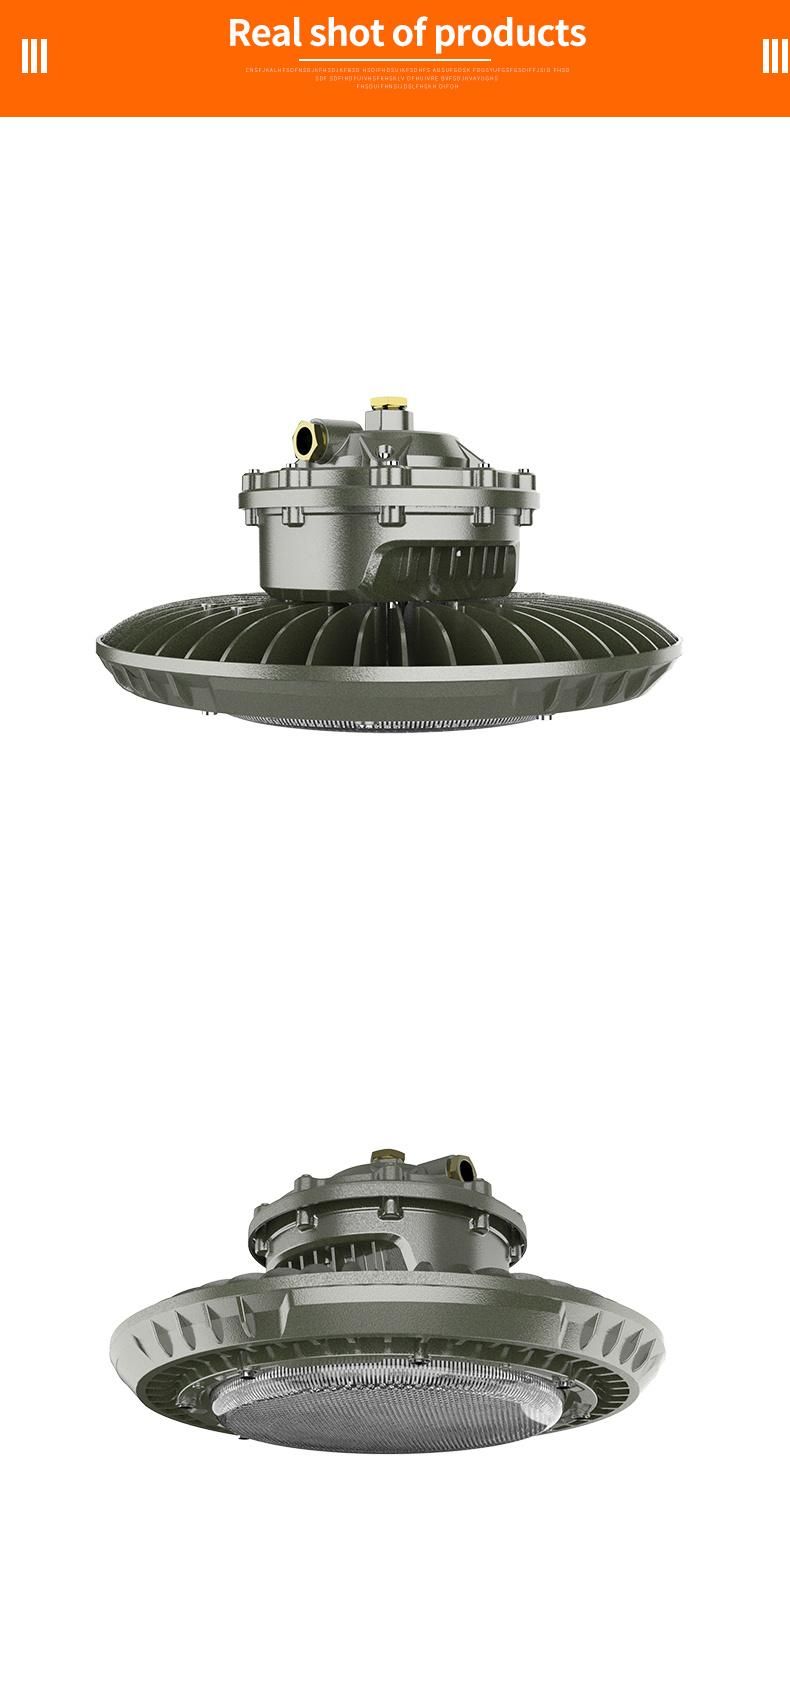 Atex Approved Explosion Proof Safety LED Light, Lighting with Explosion-Proof